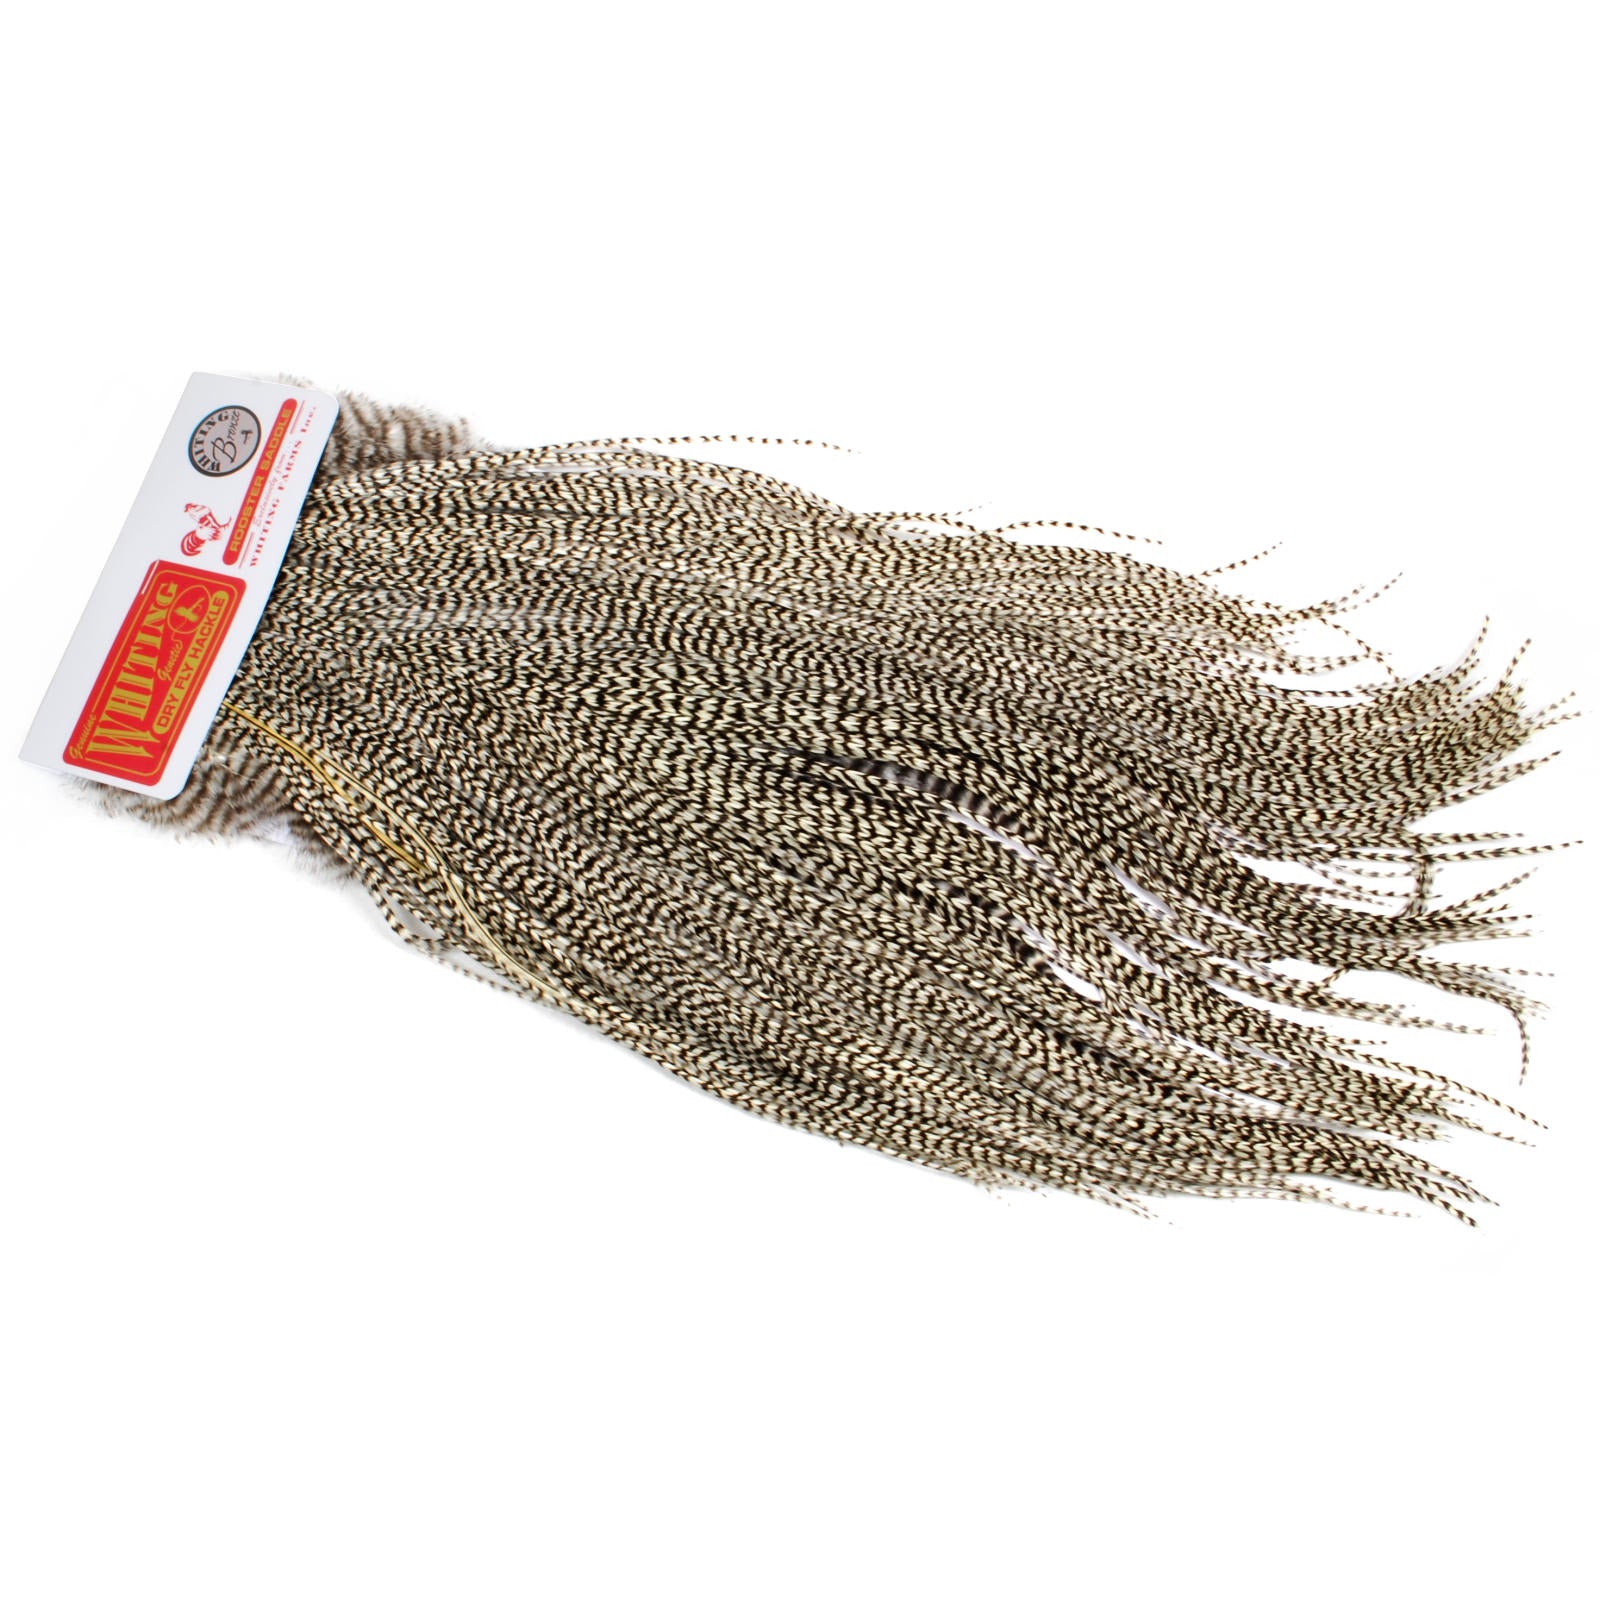 110 WHITING FEATHERS DRY FLY SADDLE HACKLE FLY TYING ASST COLORS & SIZES